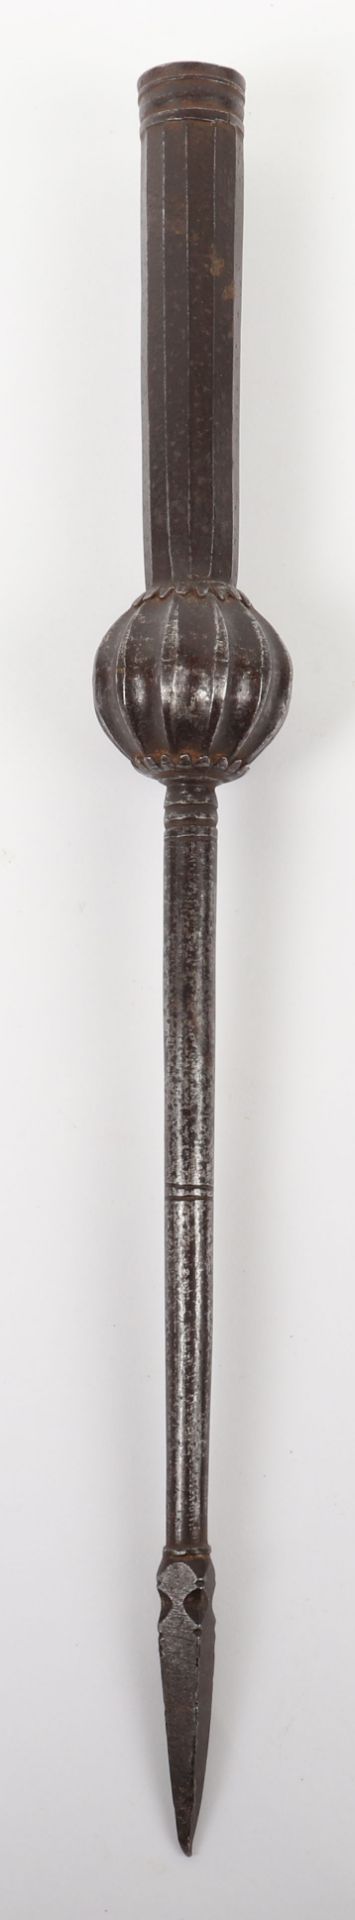 Iron Shoe from an Indian Lance, Probably 18th Century - Image 2 of 11